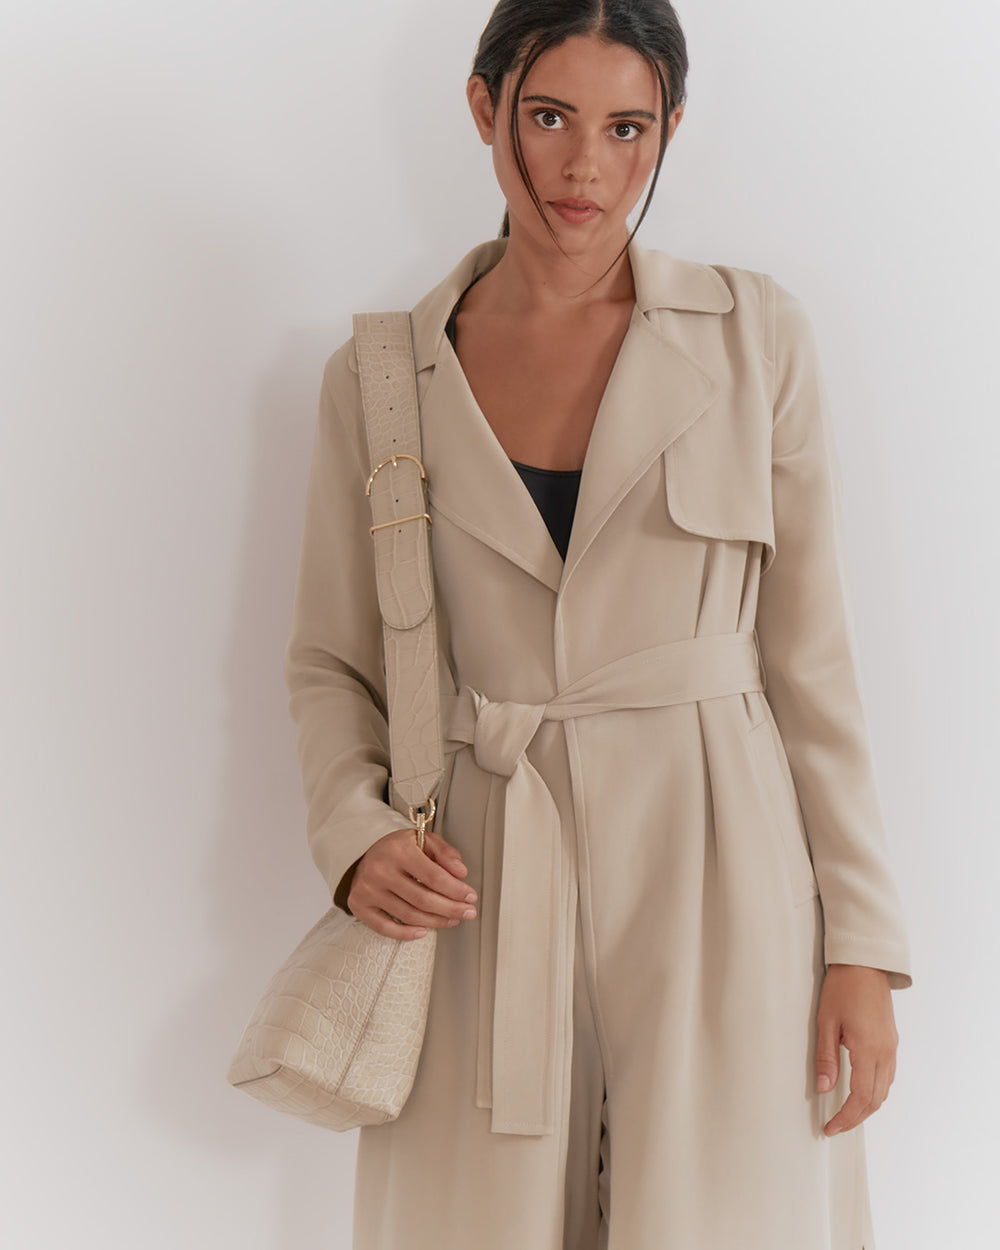 Woman in a trench coat holding a bag and wearing earphones.